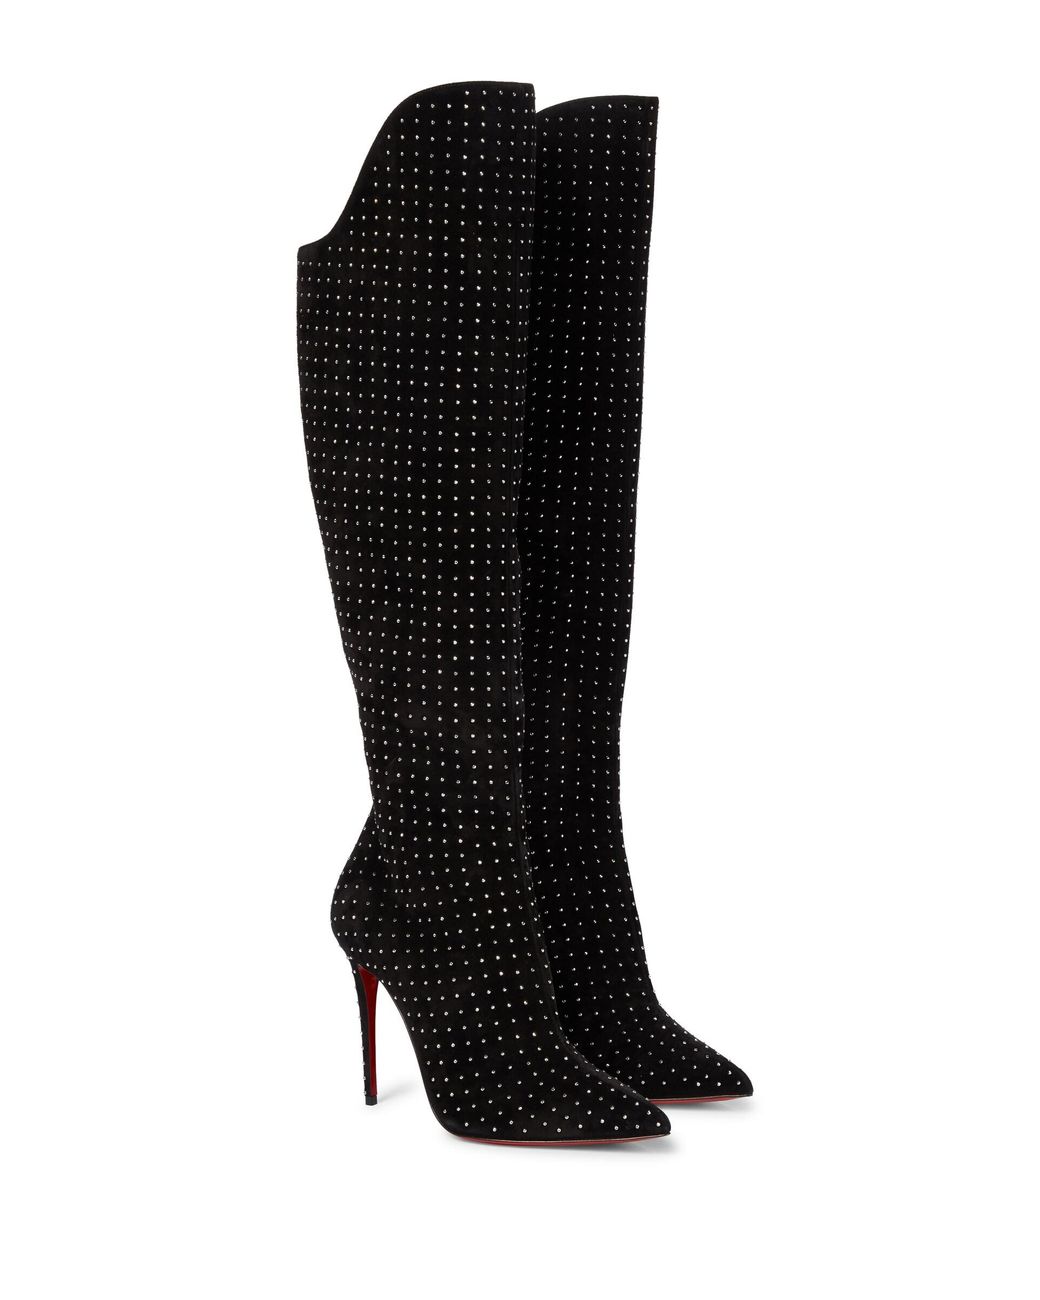 Christian Louboutin Alta Botta Plume 100 Suede Knee-high Boots in  Black/Silver (Black) | Lyst